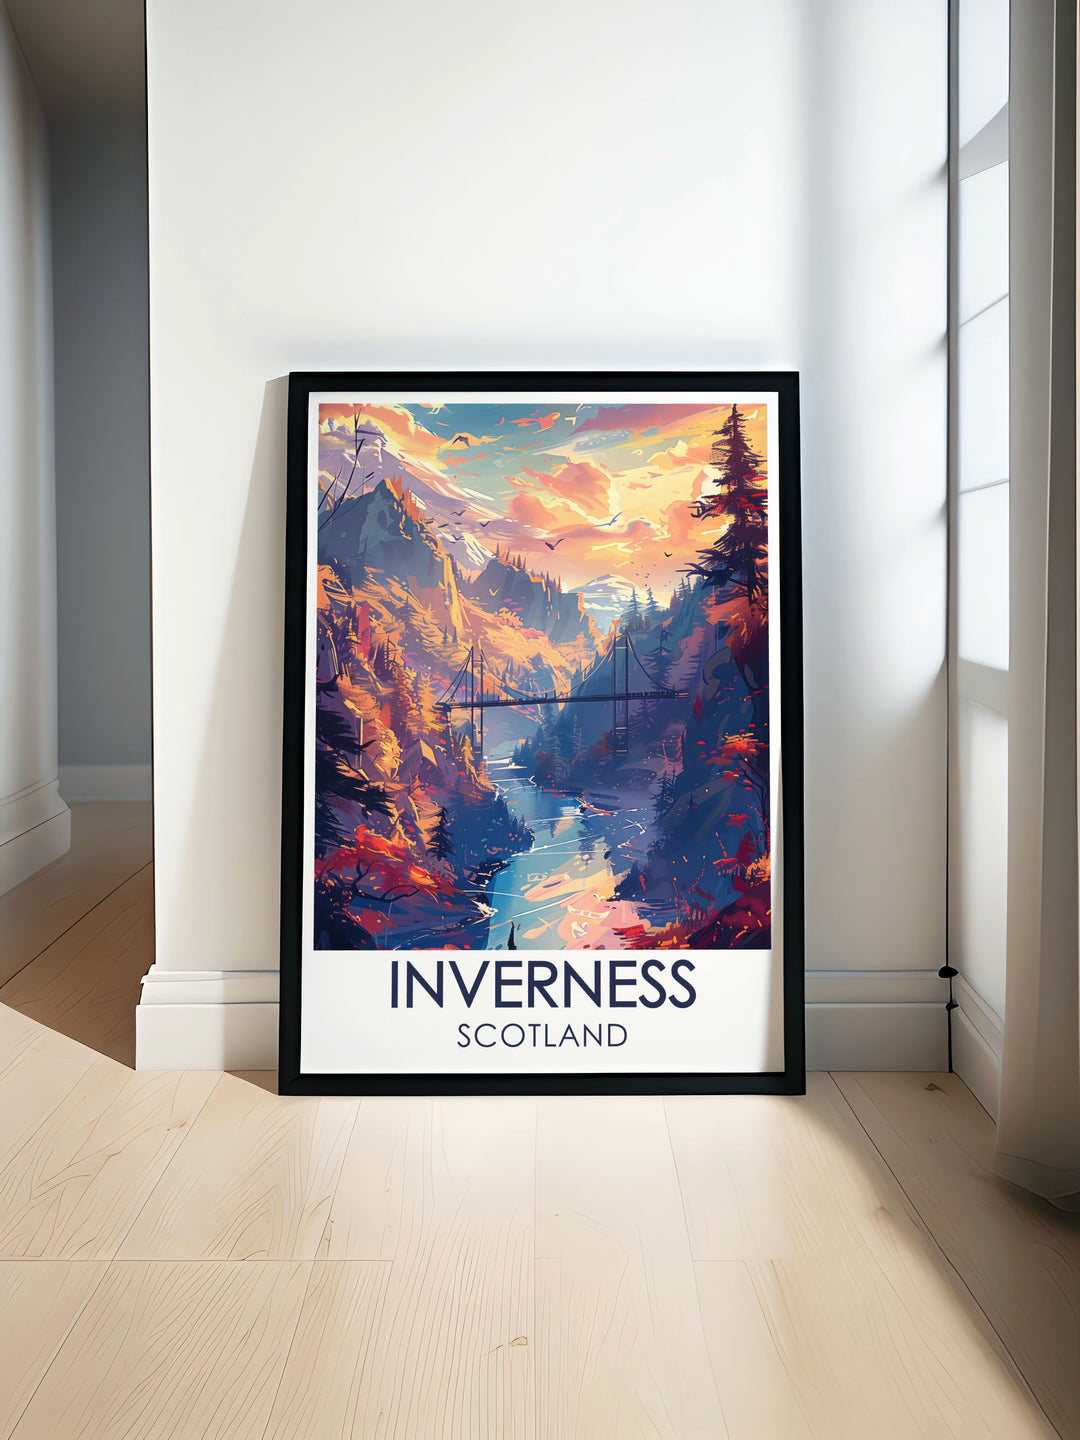 Travel poster featuring Inverness Castle with its stunning 11th century architecture, surrounded by the scenic beauty of the Scottish Highlands and the flowing River Ness.